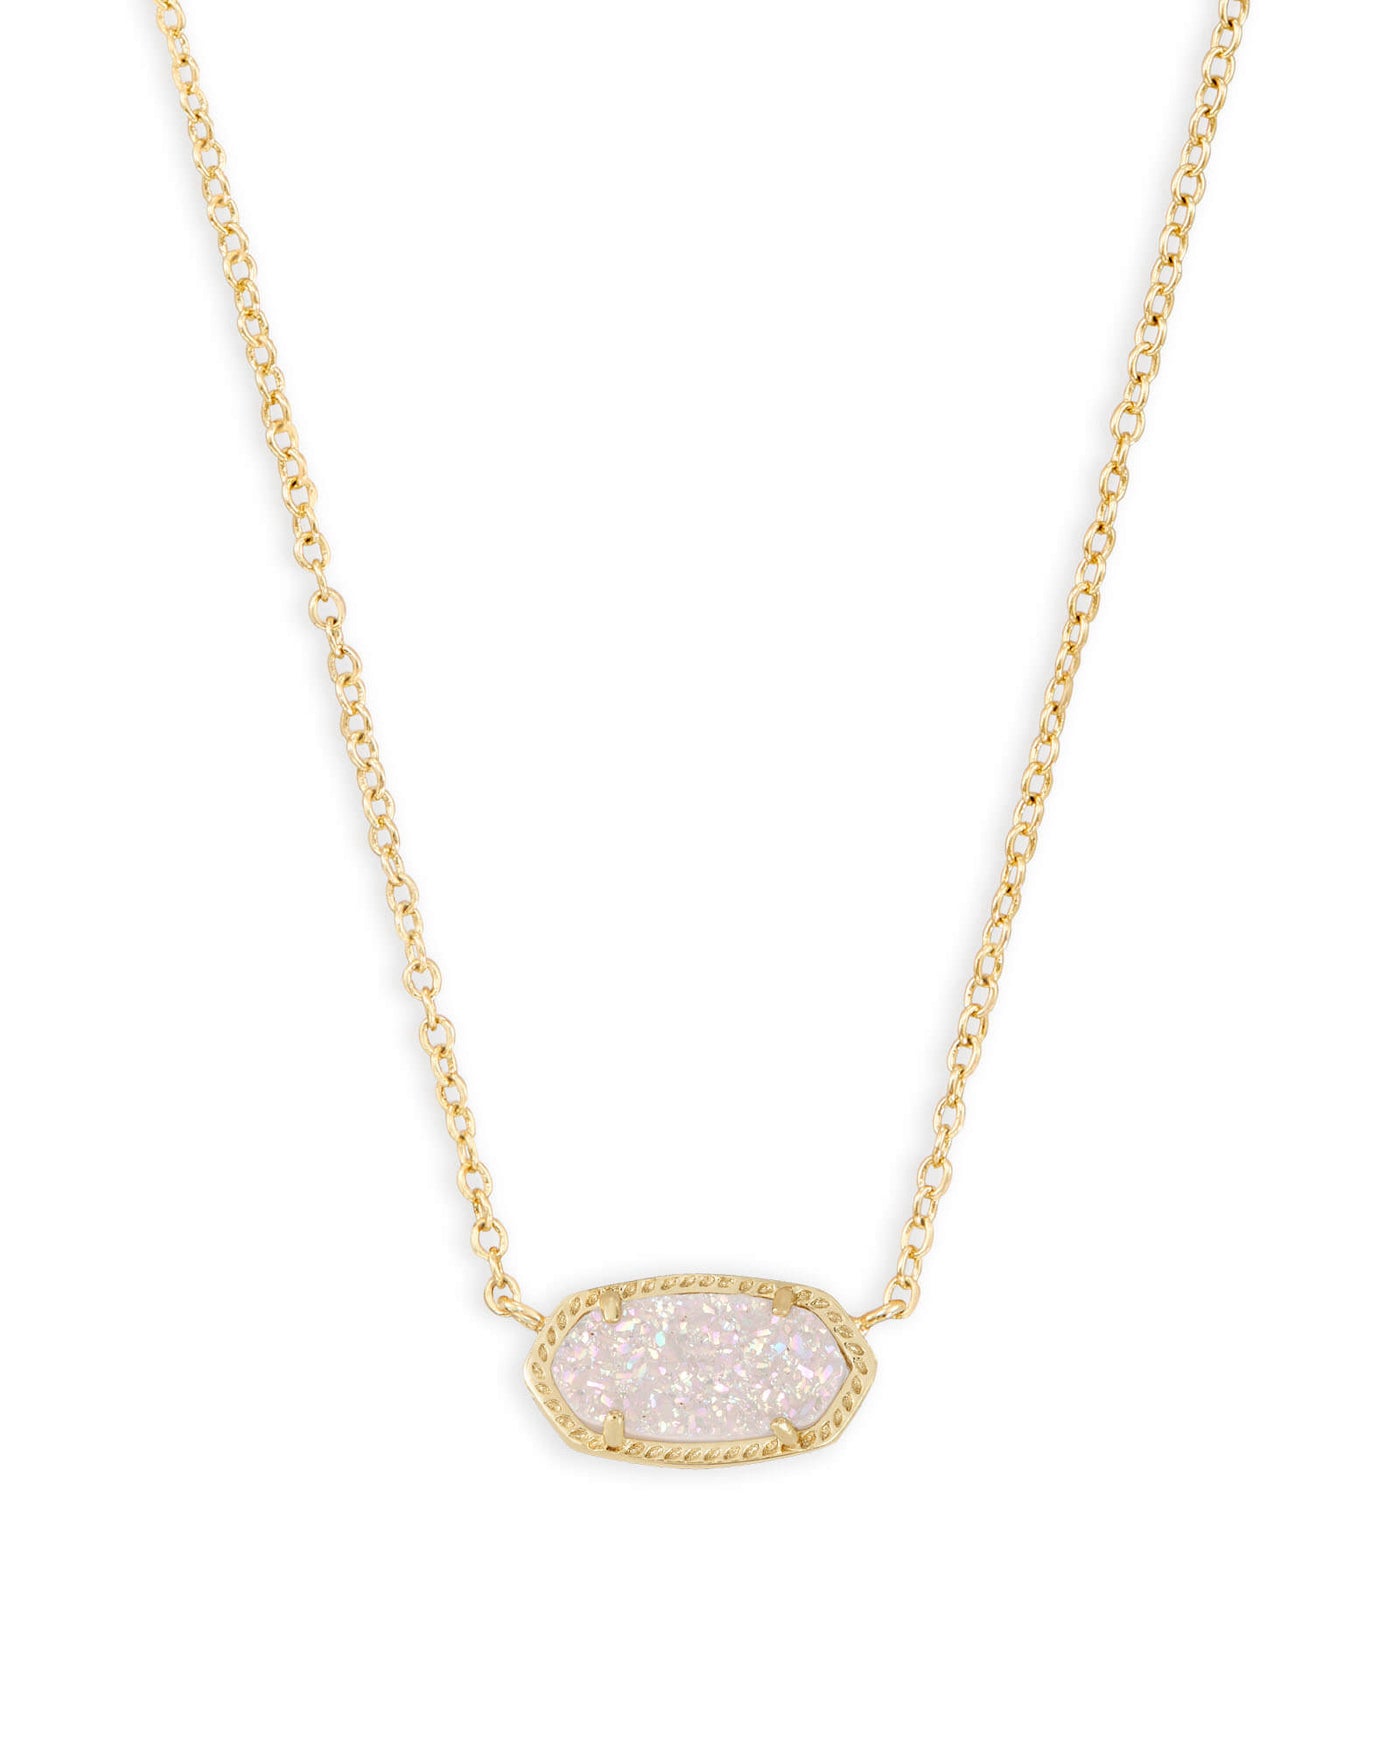 Kendra Scott Elisa Rose Gold Pendant Necklace in Iridescent Drusy-Necklaces-Kendra Scott-Market Street Nest, Fashionable Clothing, Shoes and Home Décor Located in Mabank, TX